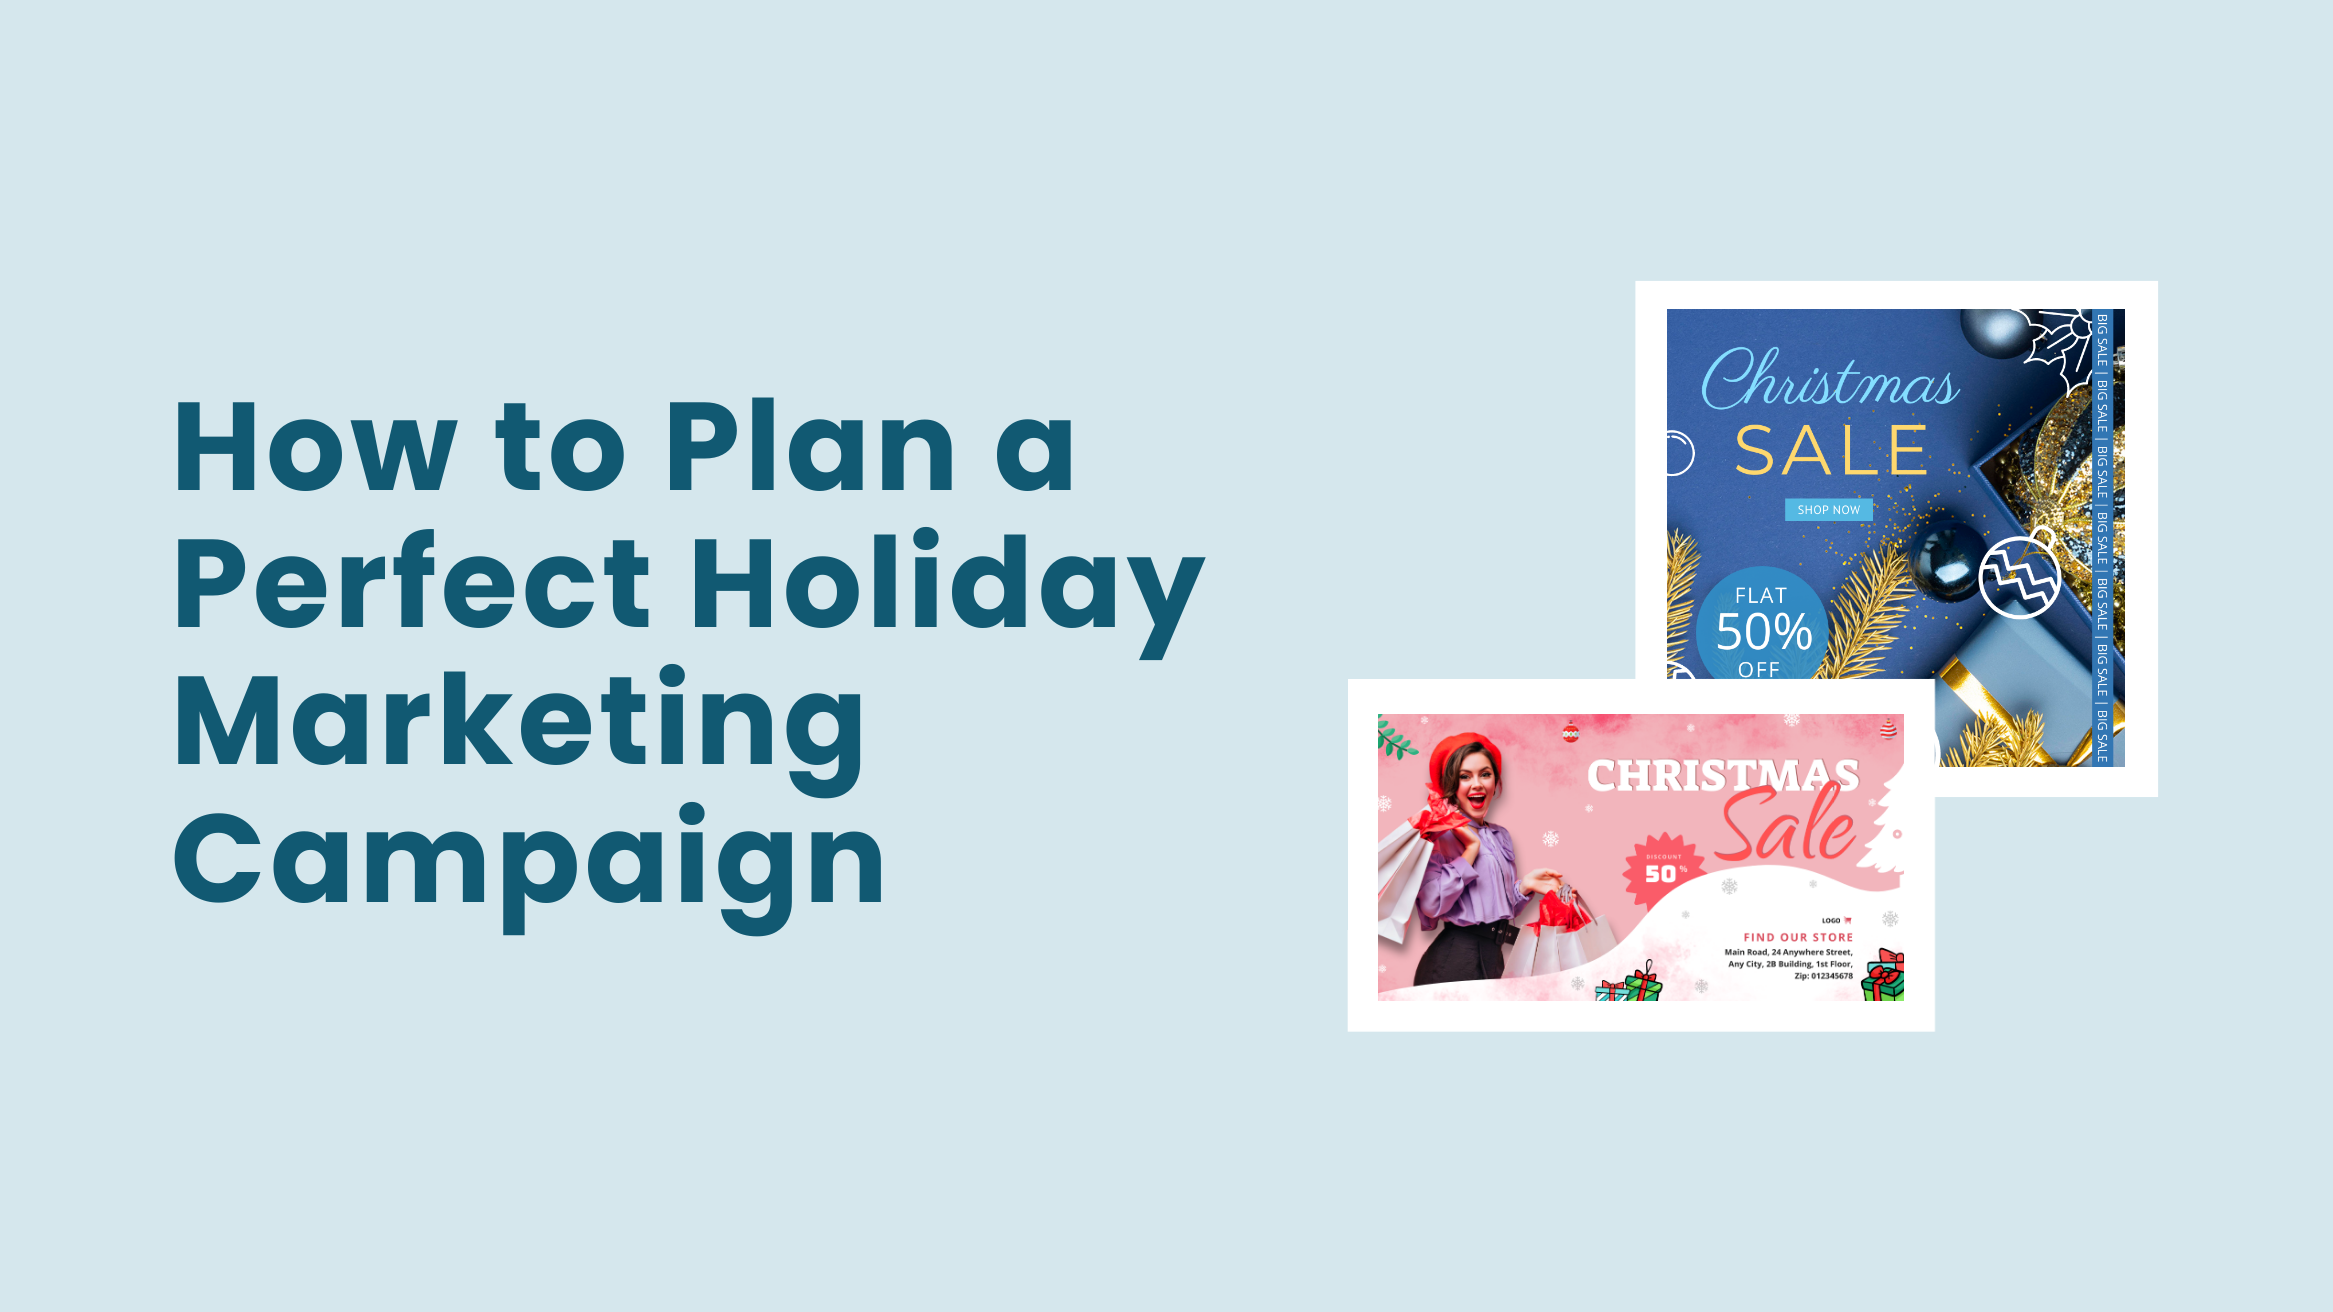 How to Plan a Perfect Holiday Marketing Campaign